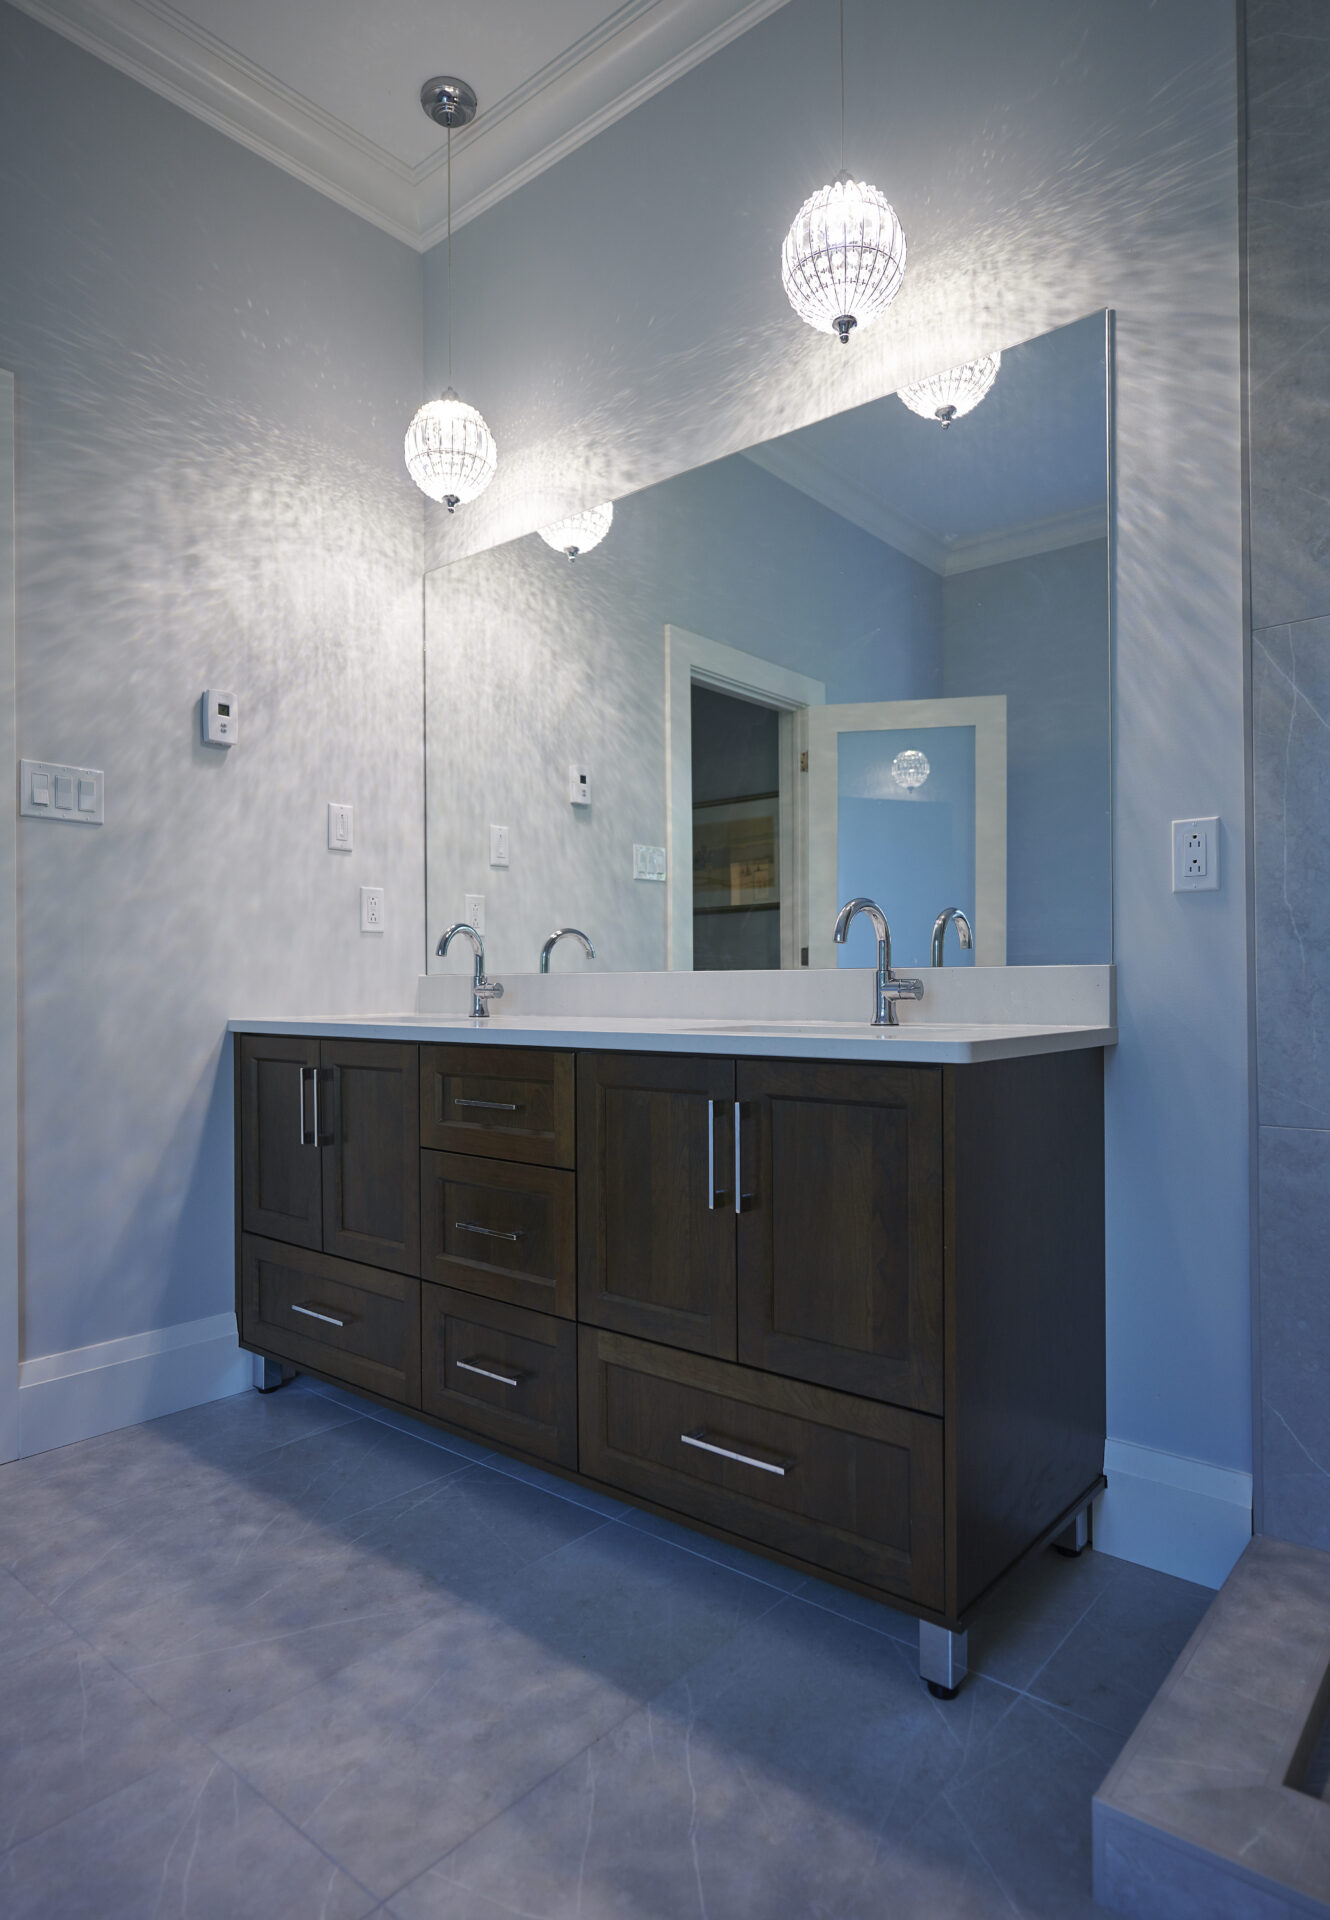 A modern bathroom with a dark wood double vanity, white countertop, two sinks, wall-mounted faucets, and ornate pendant lights casting a patterned glow.